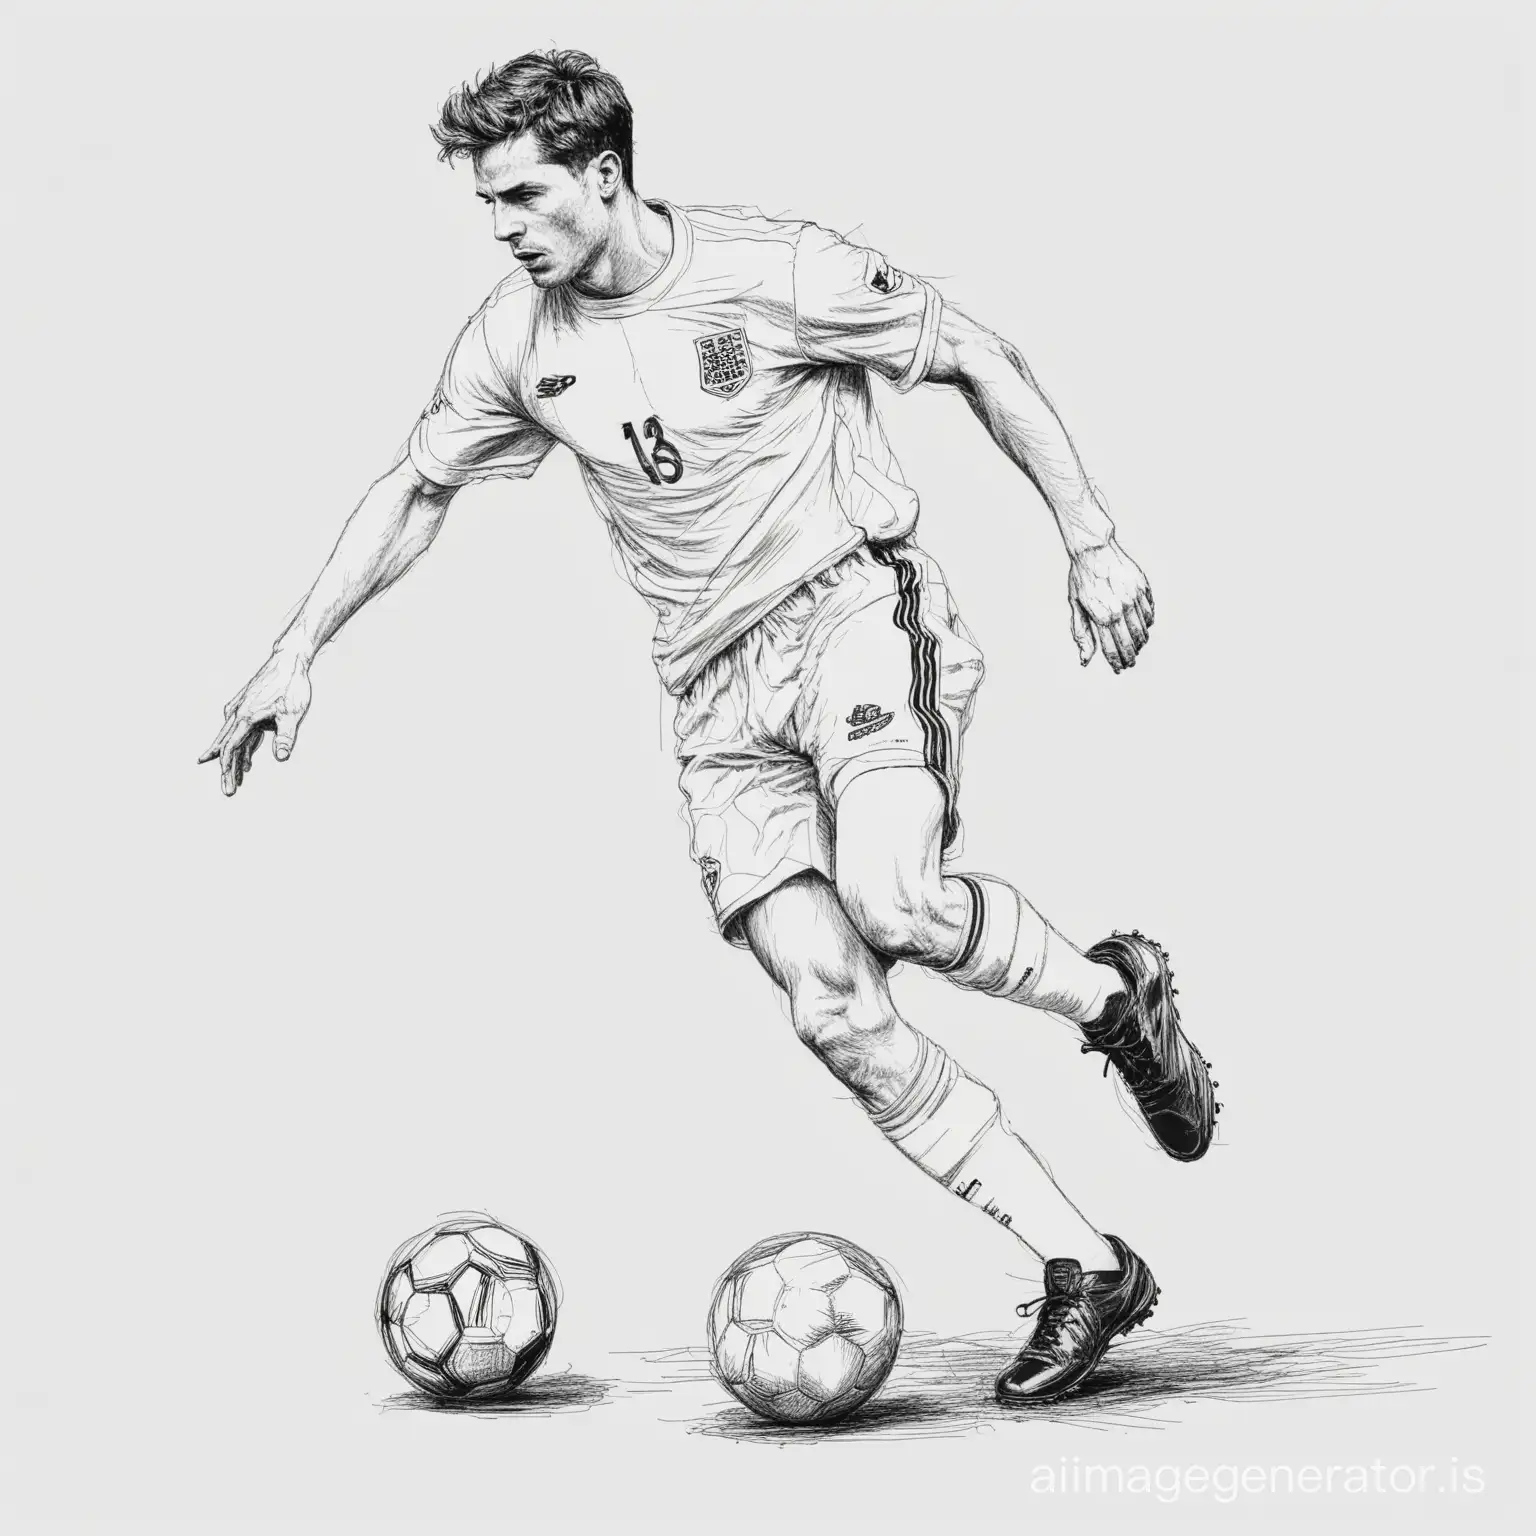 BLACK LINE DRAWING, OF A ENGLISH SOCCER PLAYER WITH BALL